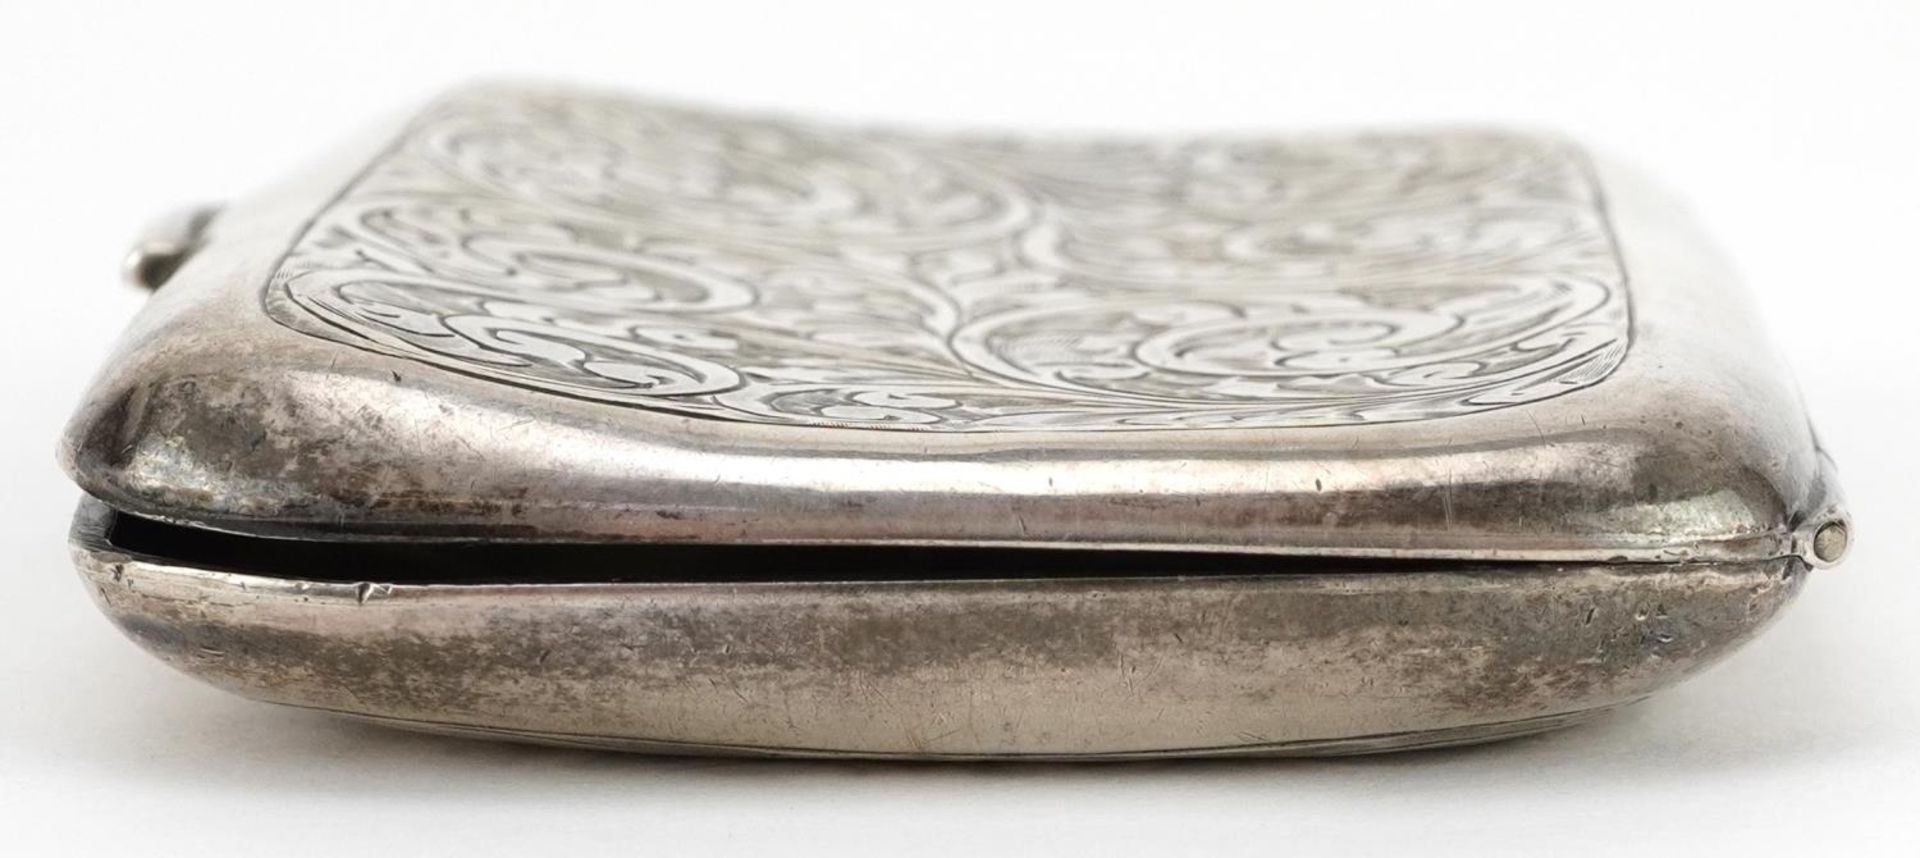 S Blanckensee & Son Ltd, George V silver cigarette case engraved with foliage, Chester 1922, 8.5cm - Image 5 of 5